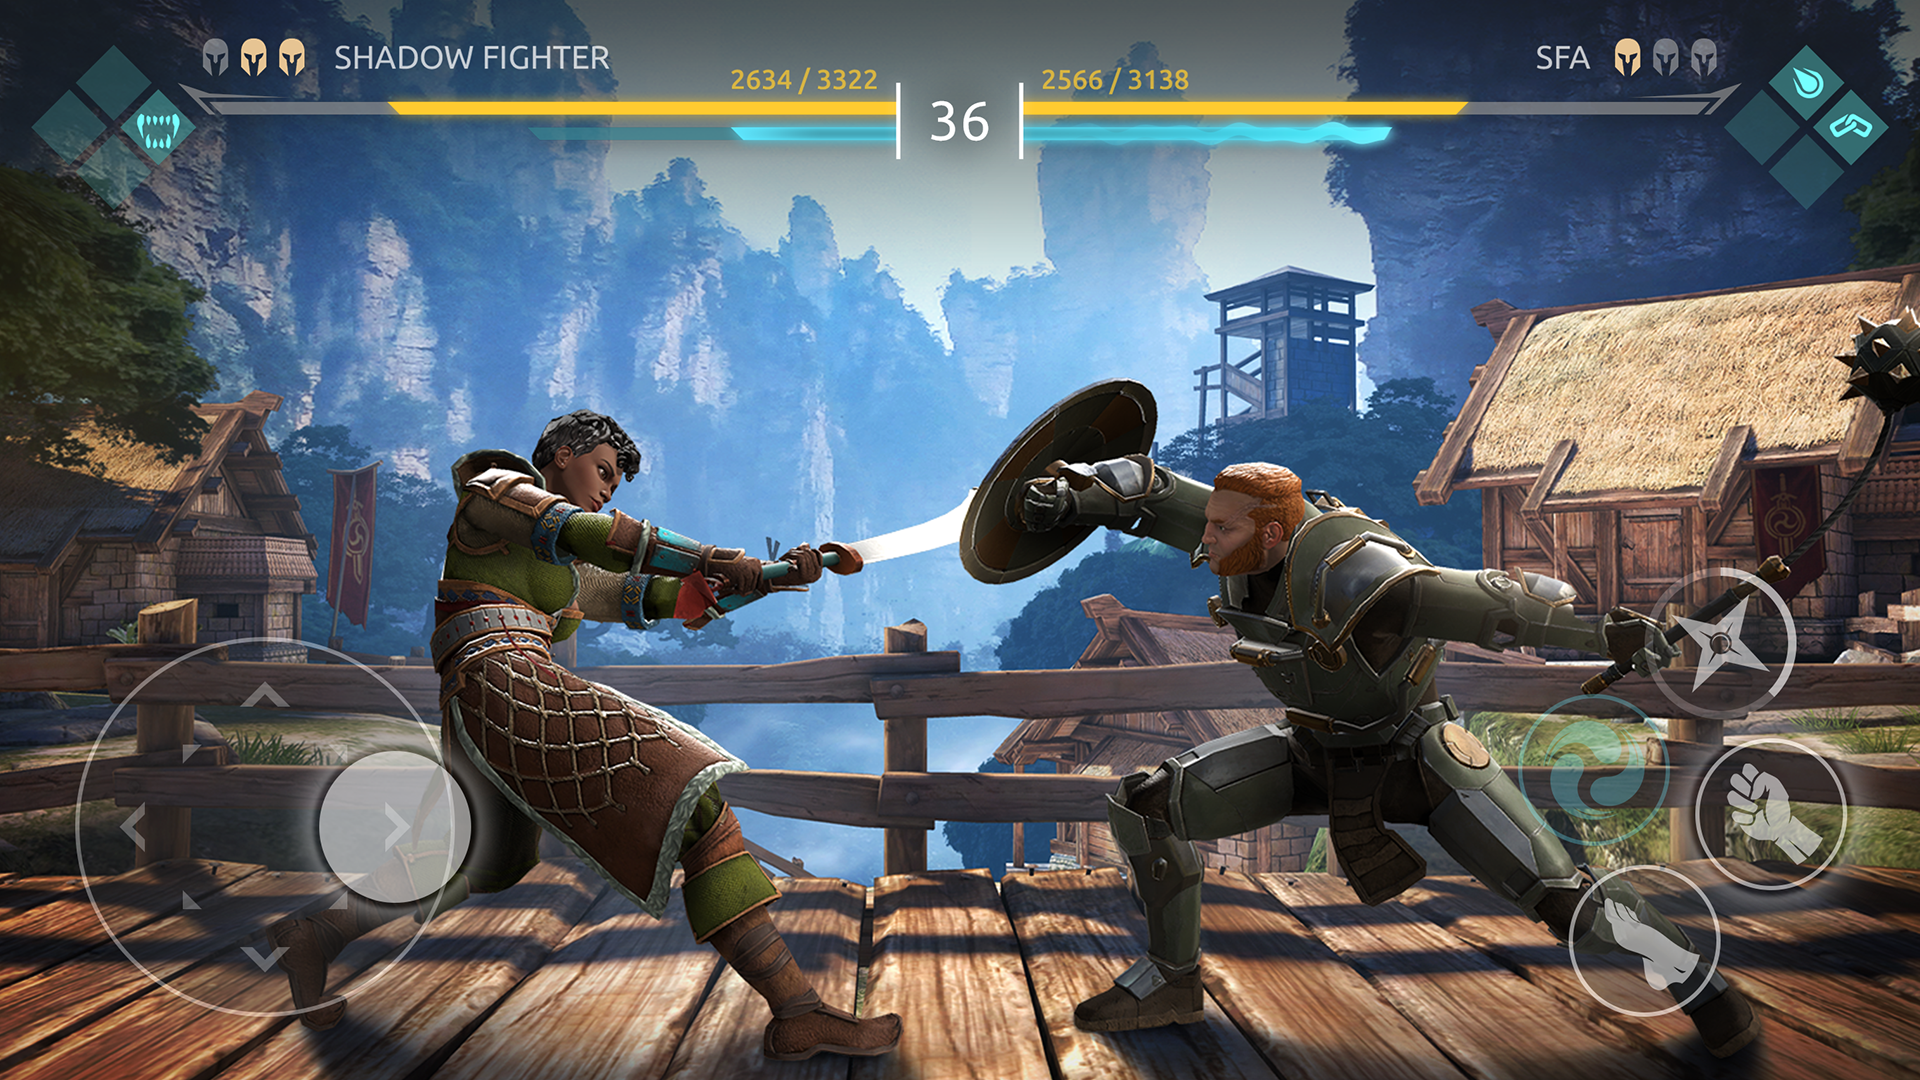 Play Shadow Fight 4: Arena Online